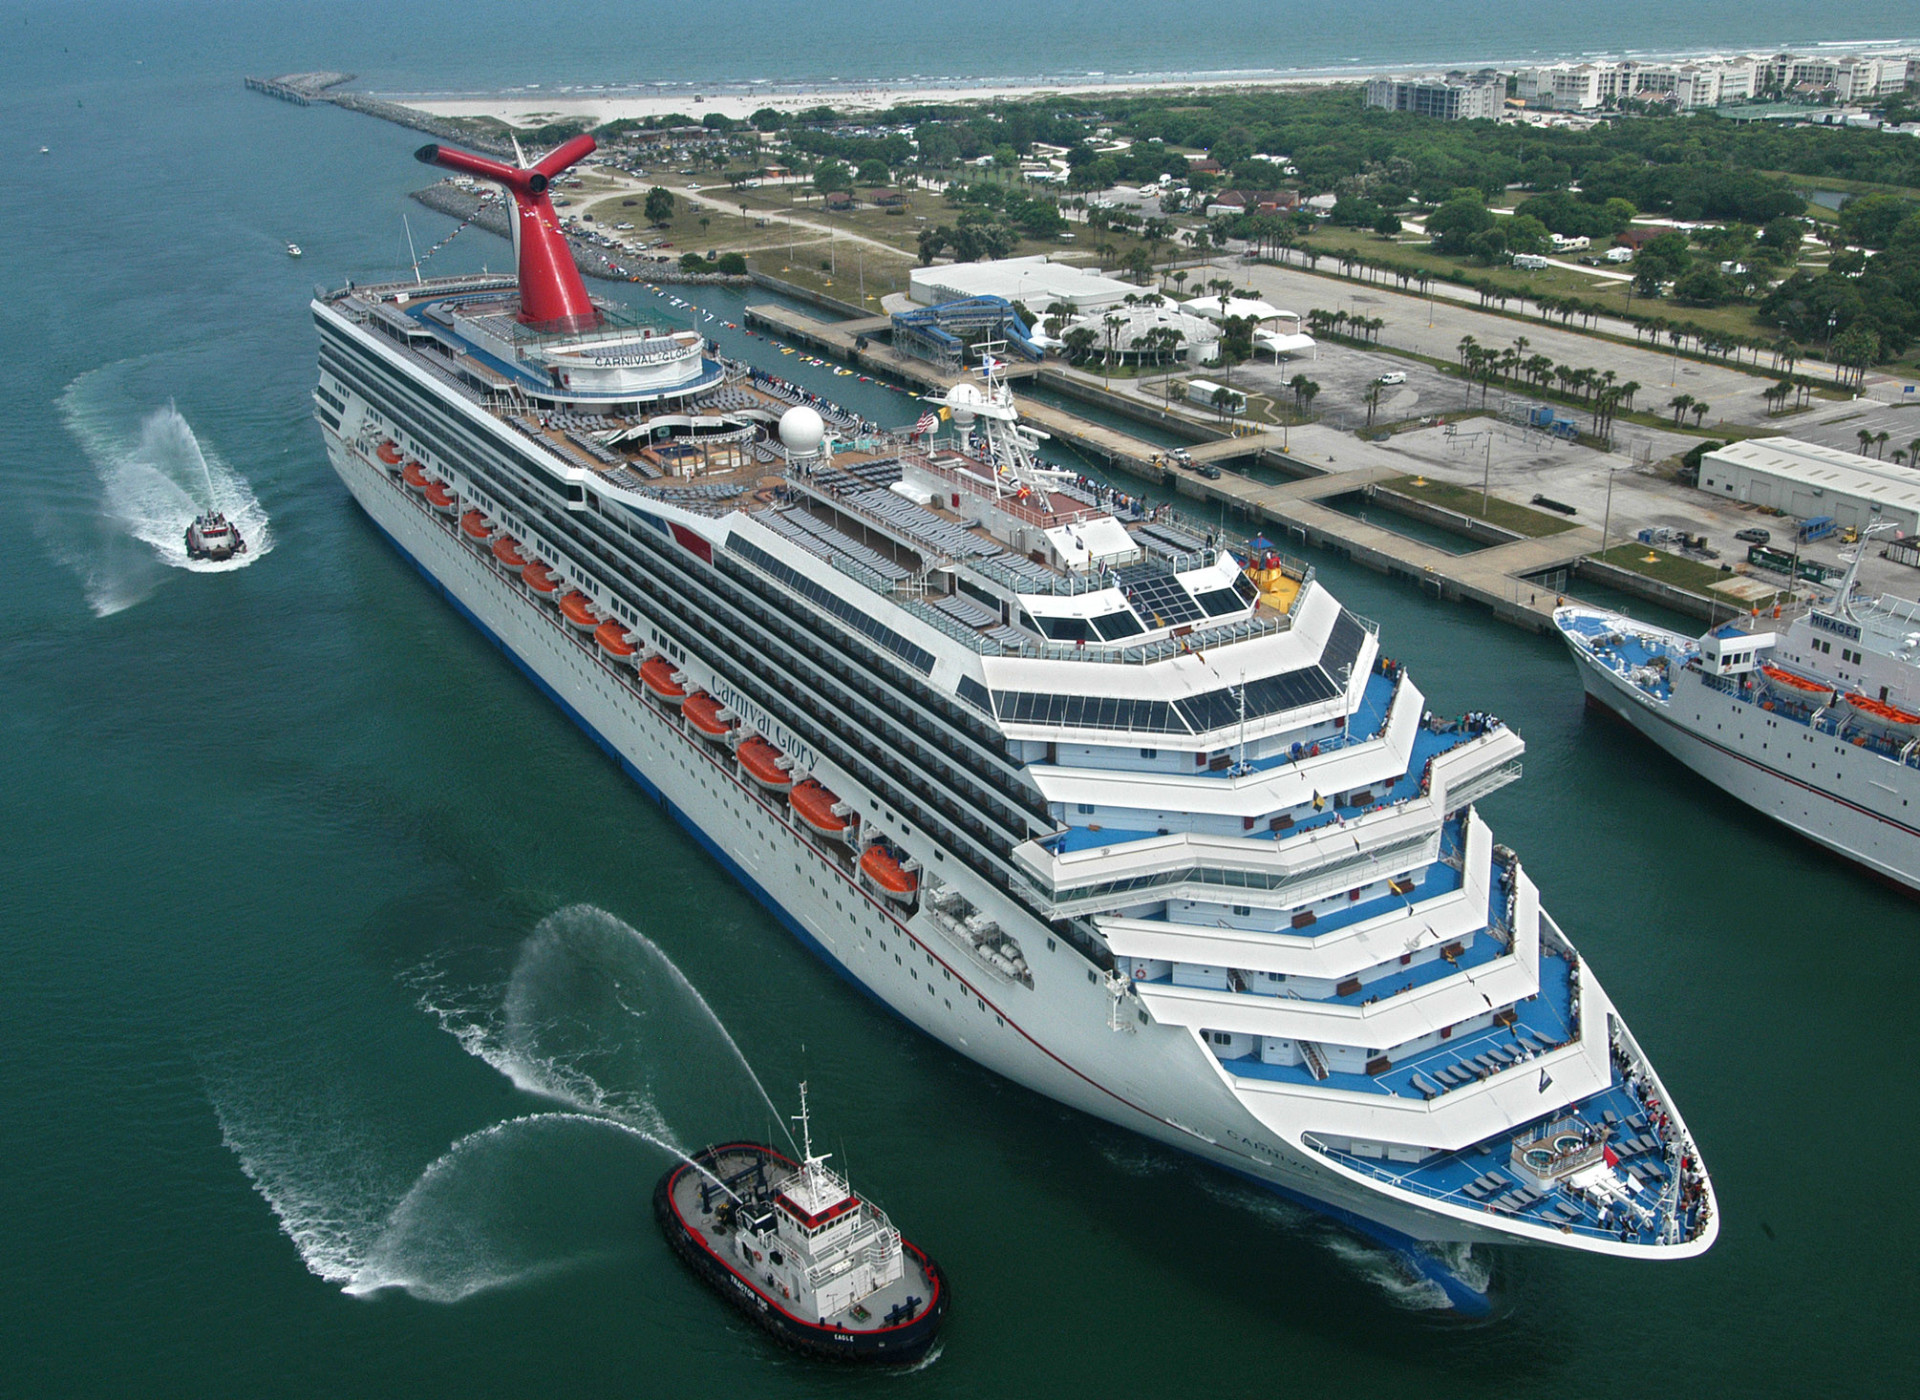 <p>On December 4, 2004, Annette Mizener went missing during her nine-day trip on Carnival Cruise's The Pride in the Mexican Riviera. She was accompanied by her parents, daughter, and husband.</p><p><a href="https://www.msn.com/en-us/community/channel/vid-7xx8mnucu55yw63we9va2gwr7uihbxwc68fxqp25x6tg4ftibpra?cvid=94631541bc0f4f89bfd59158d696ad7e">Follow us and access great exclusive content every day</a></p>